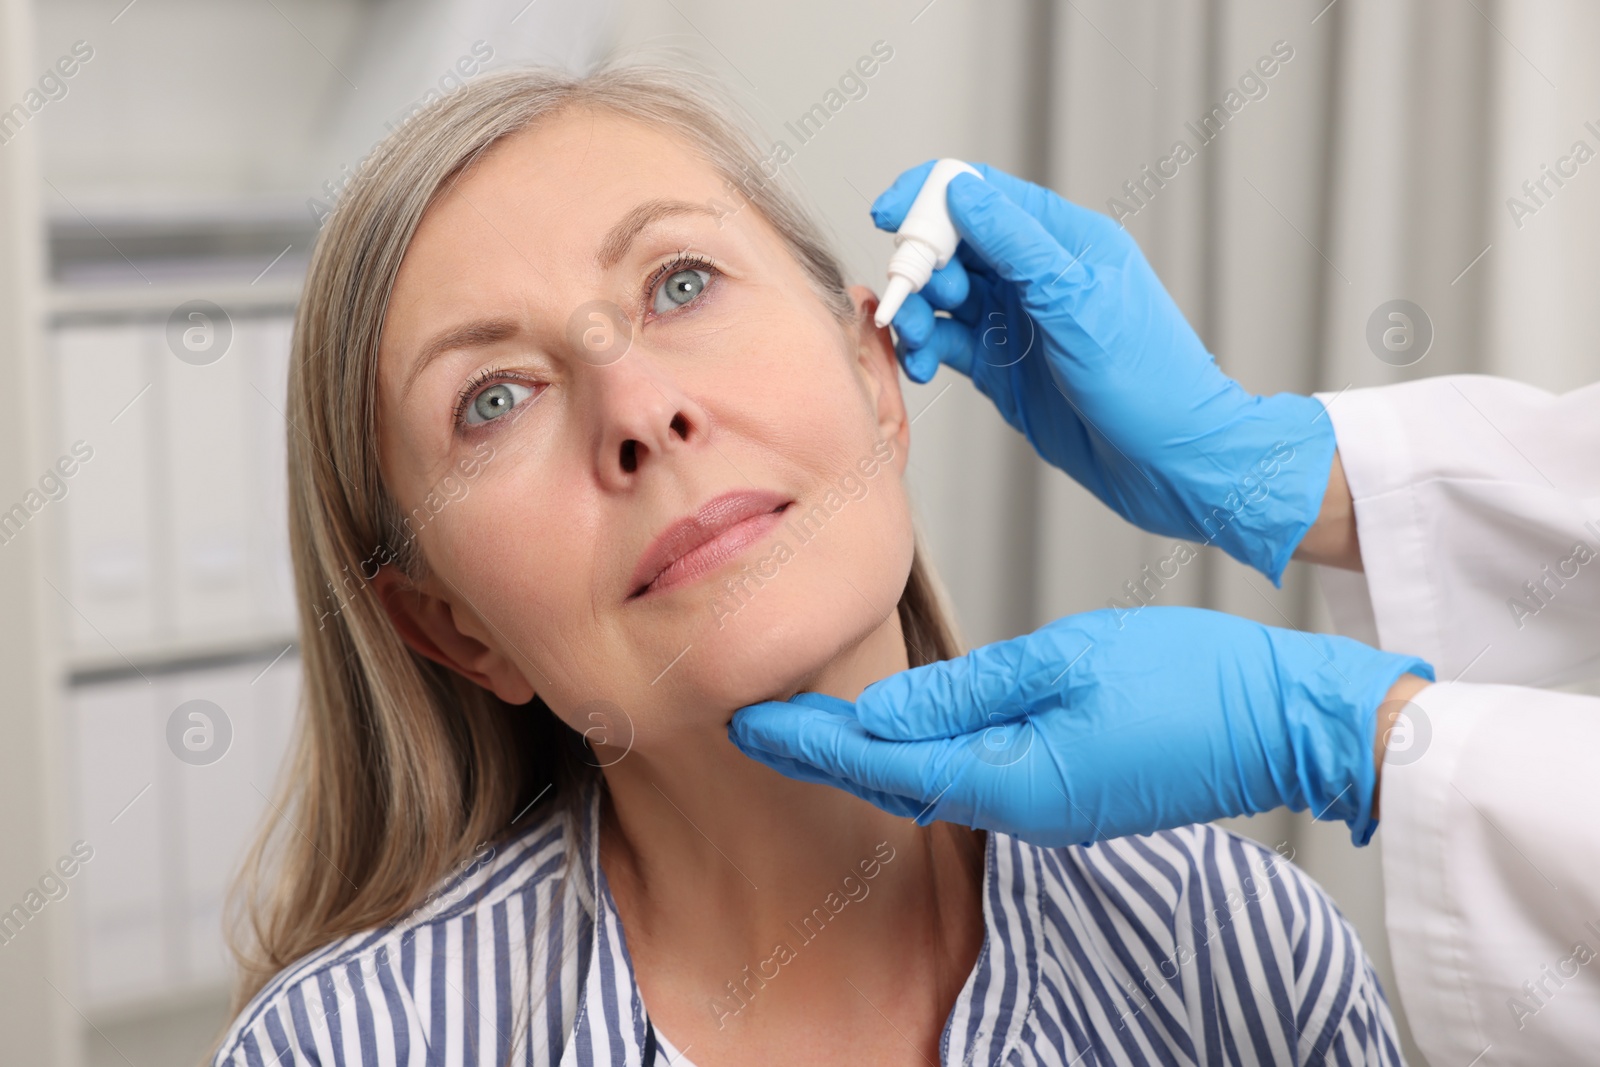 Photo of Medical drops. Doctor dripping medication into woman's ear indoors